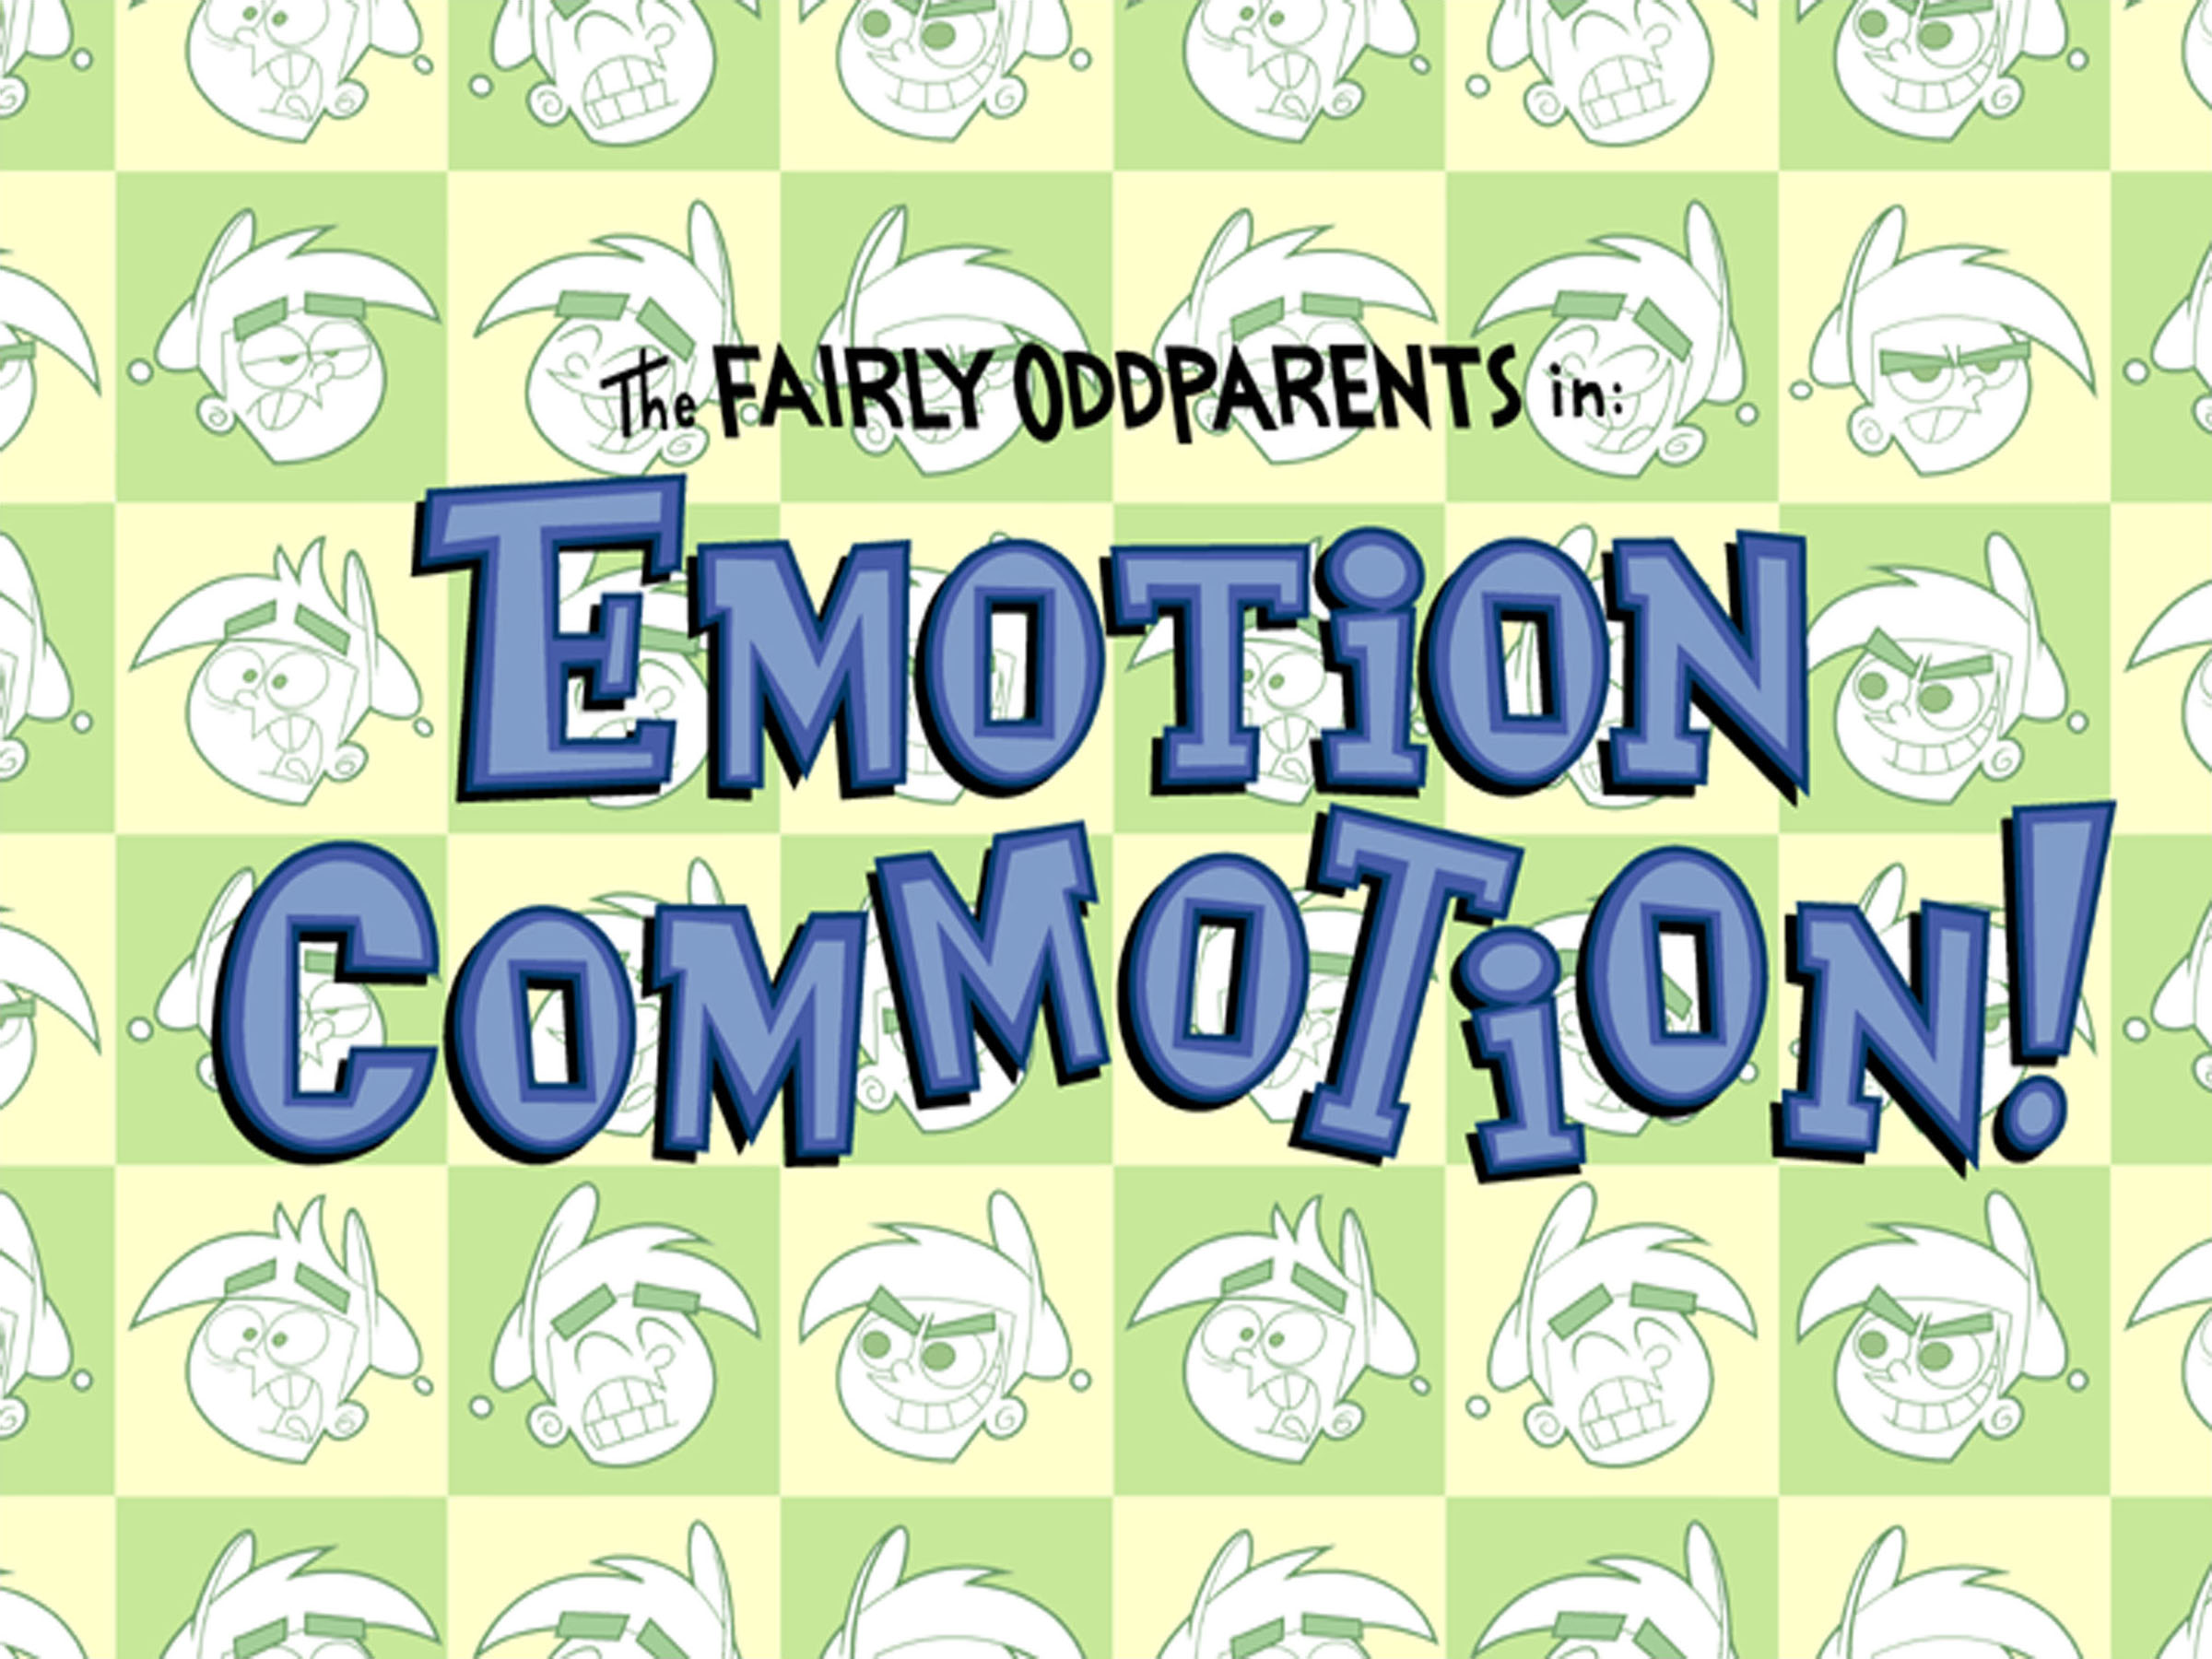 the-fairly-oddparents-in-emotion-commotion_3208444020_o.jpg.